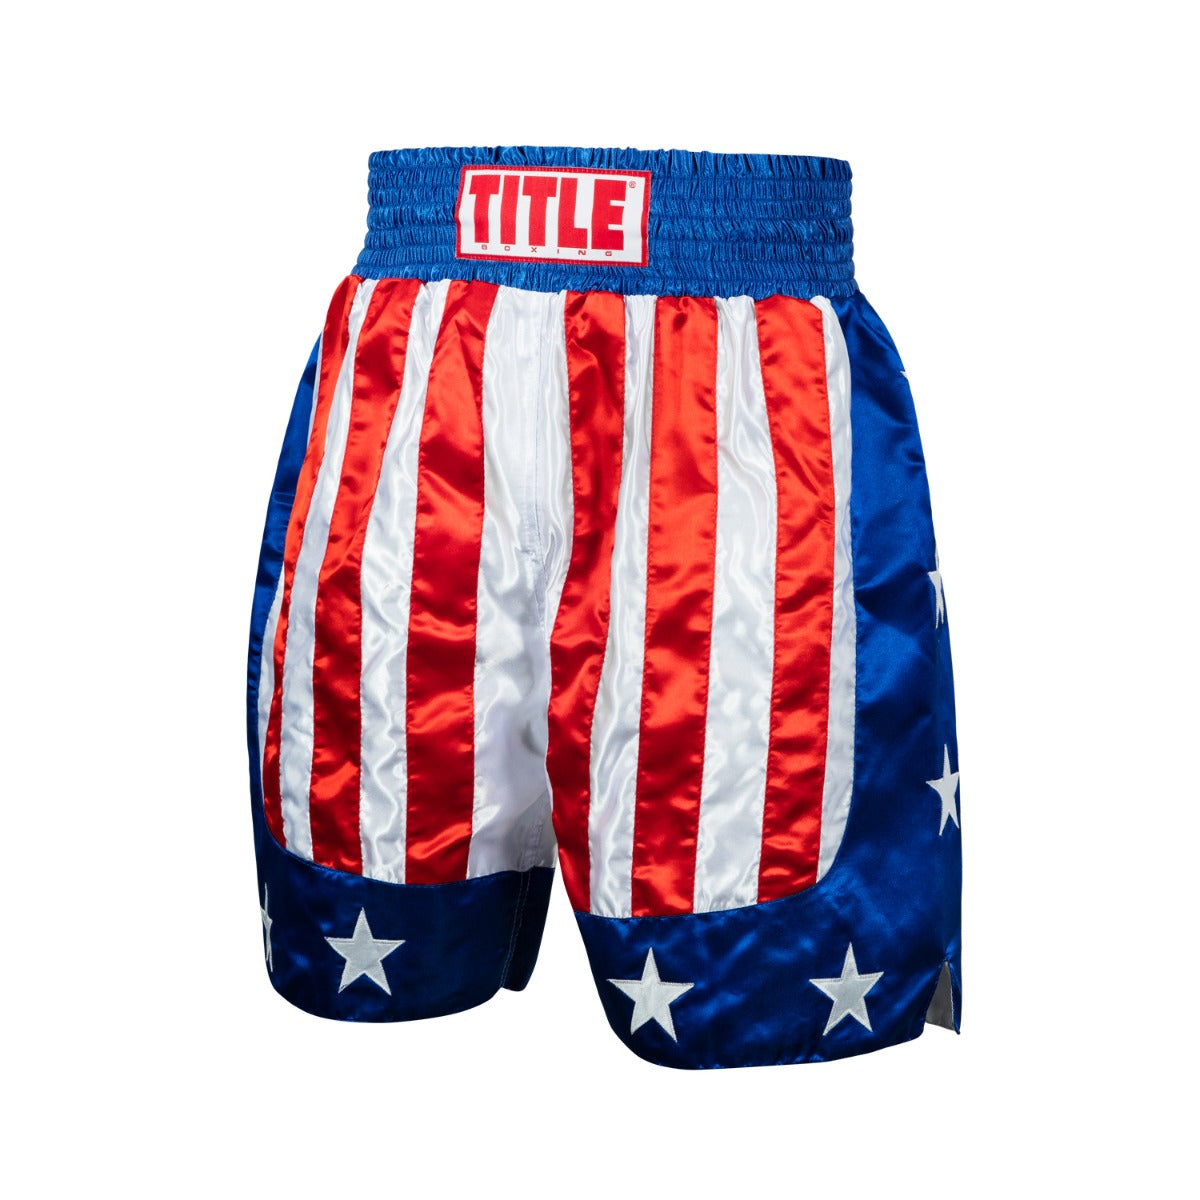 TITLE USA Stock Boxing Trunks